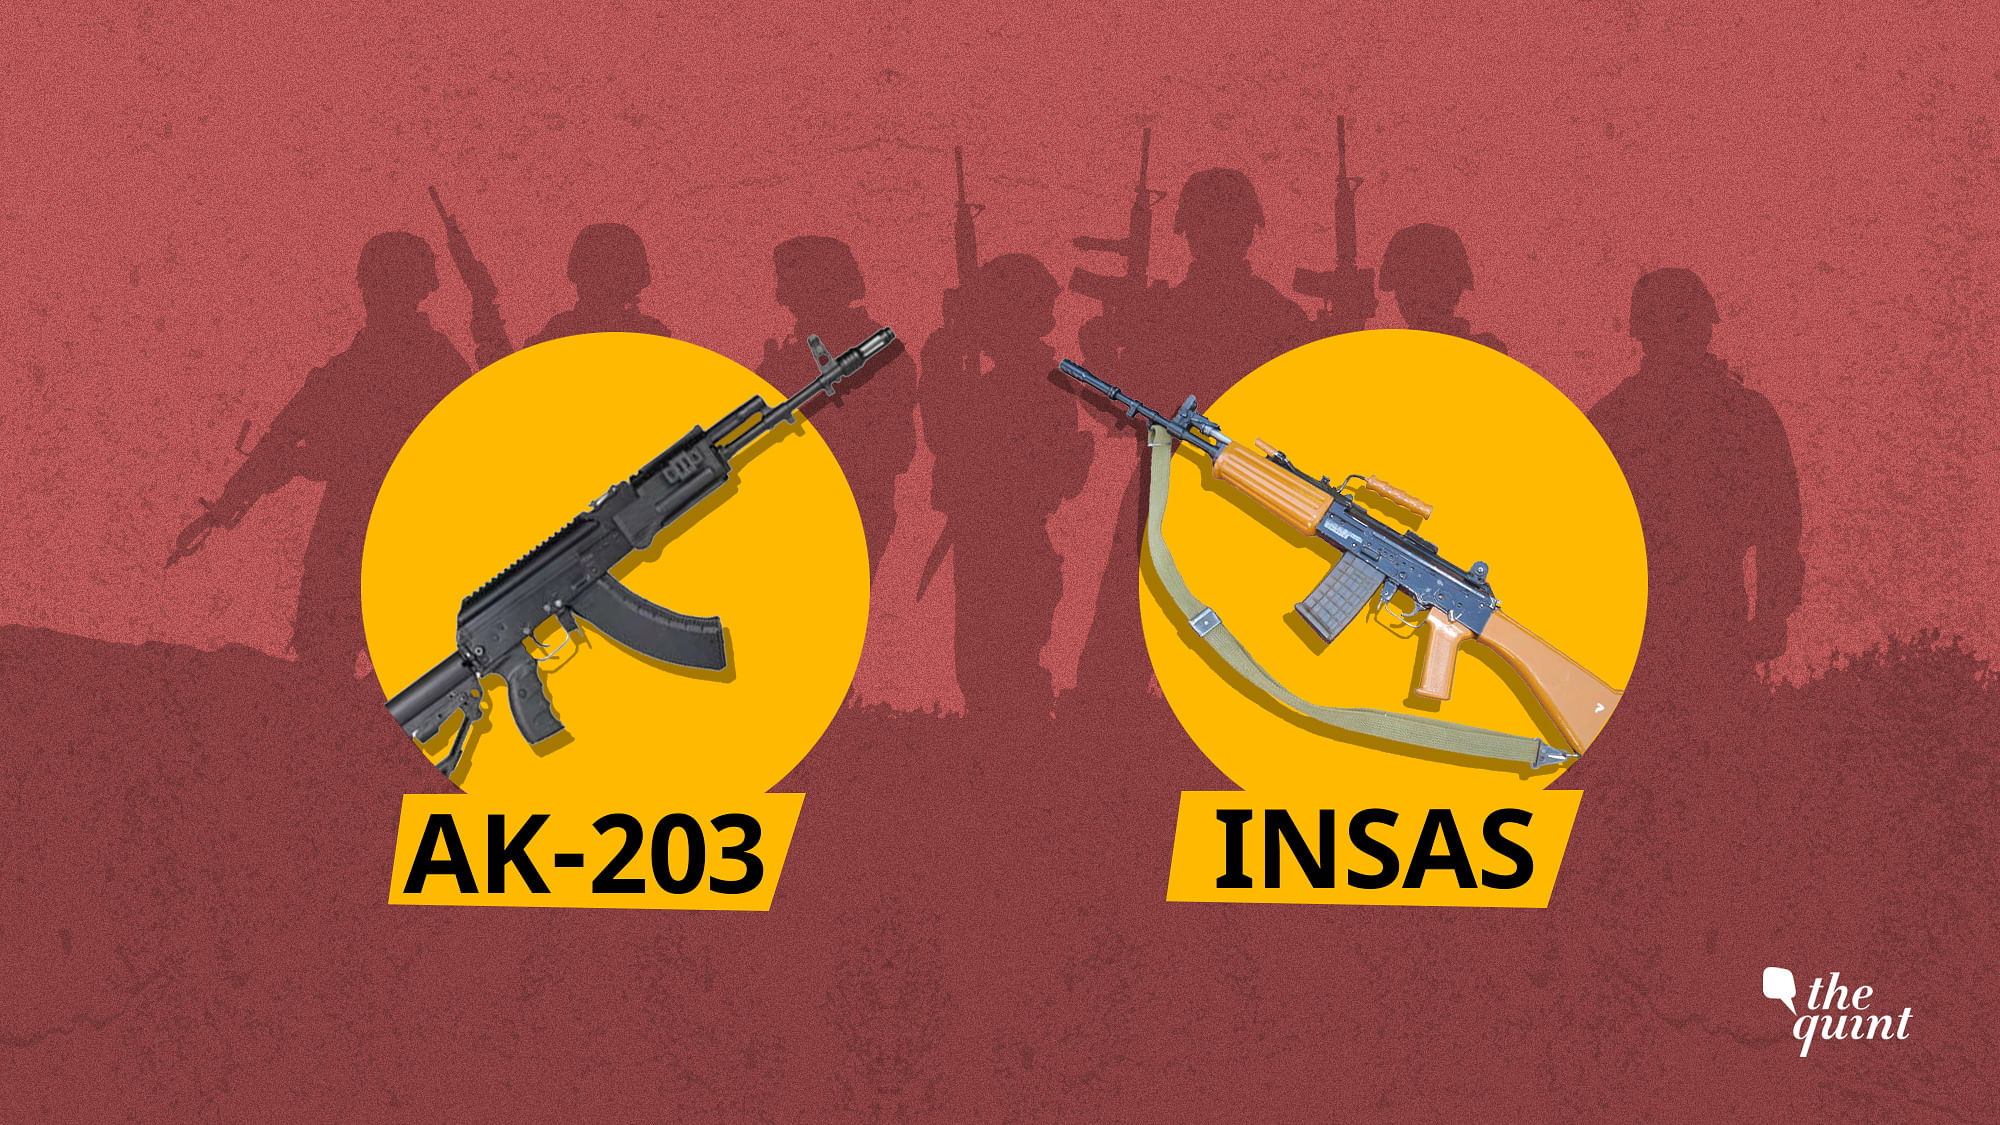 The AK-203 assault rifle will soon be manufactured in Amethi.